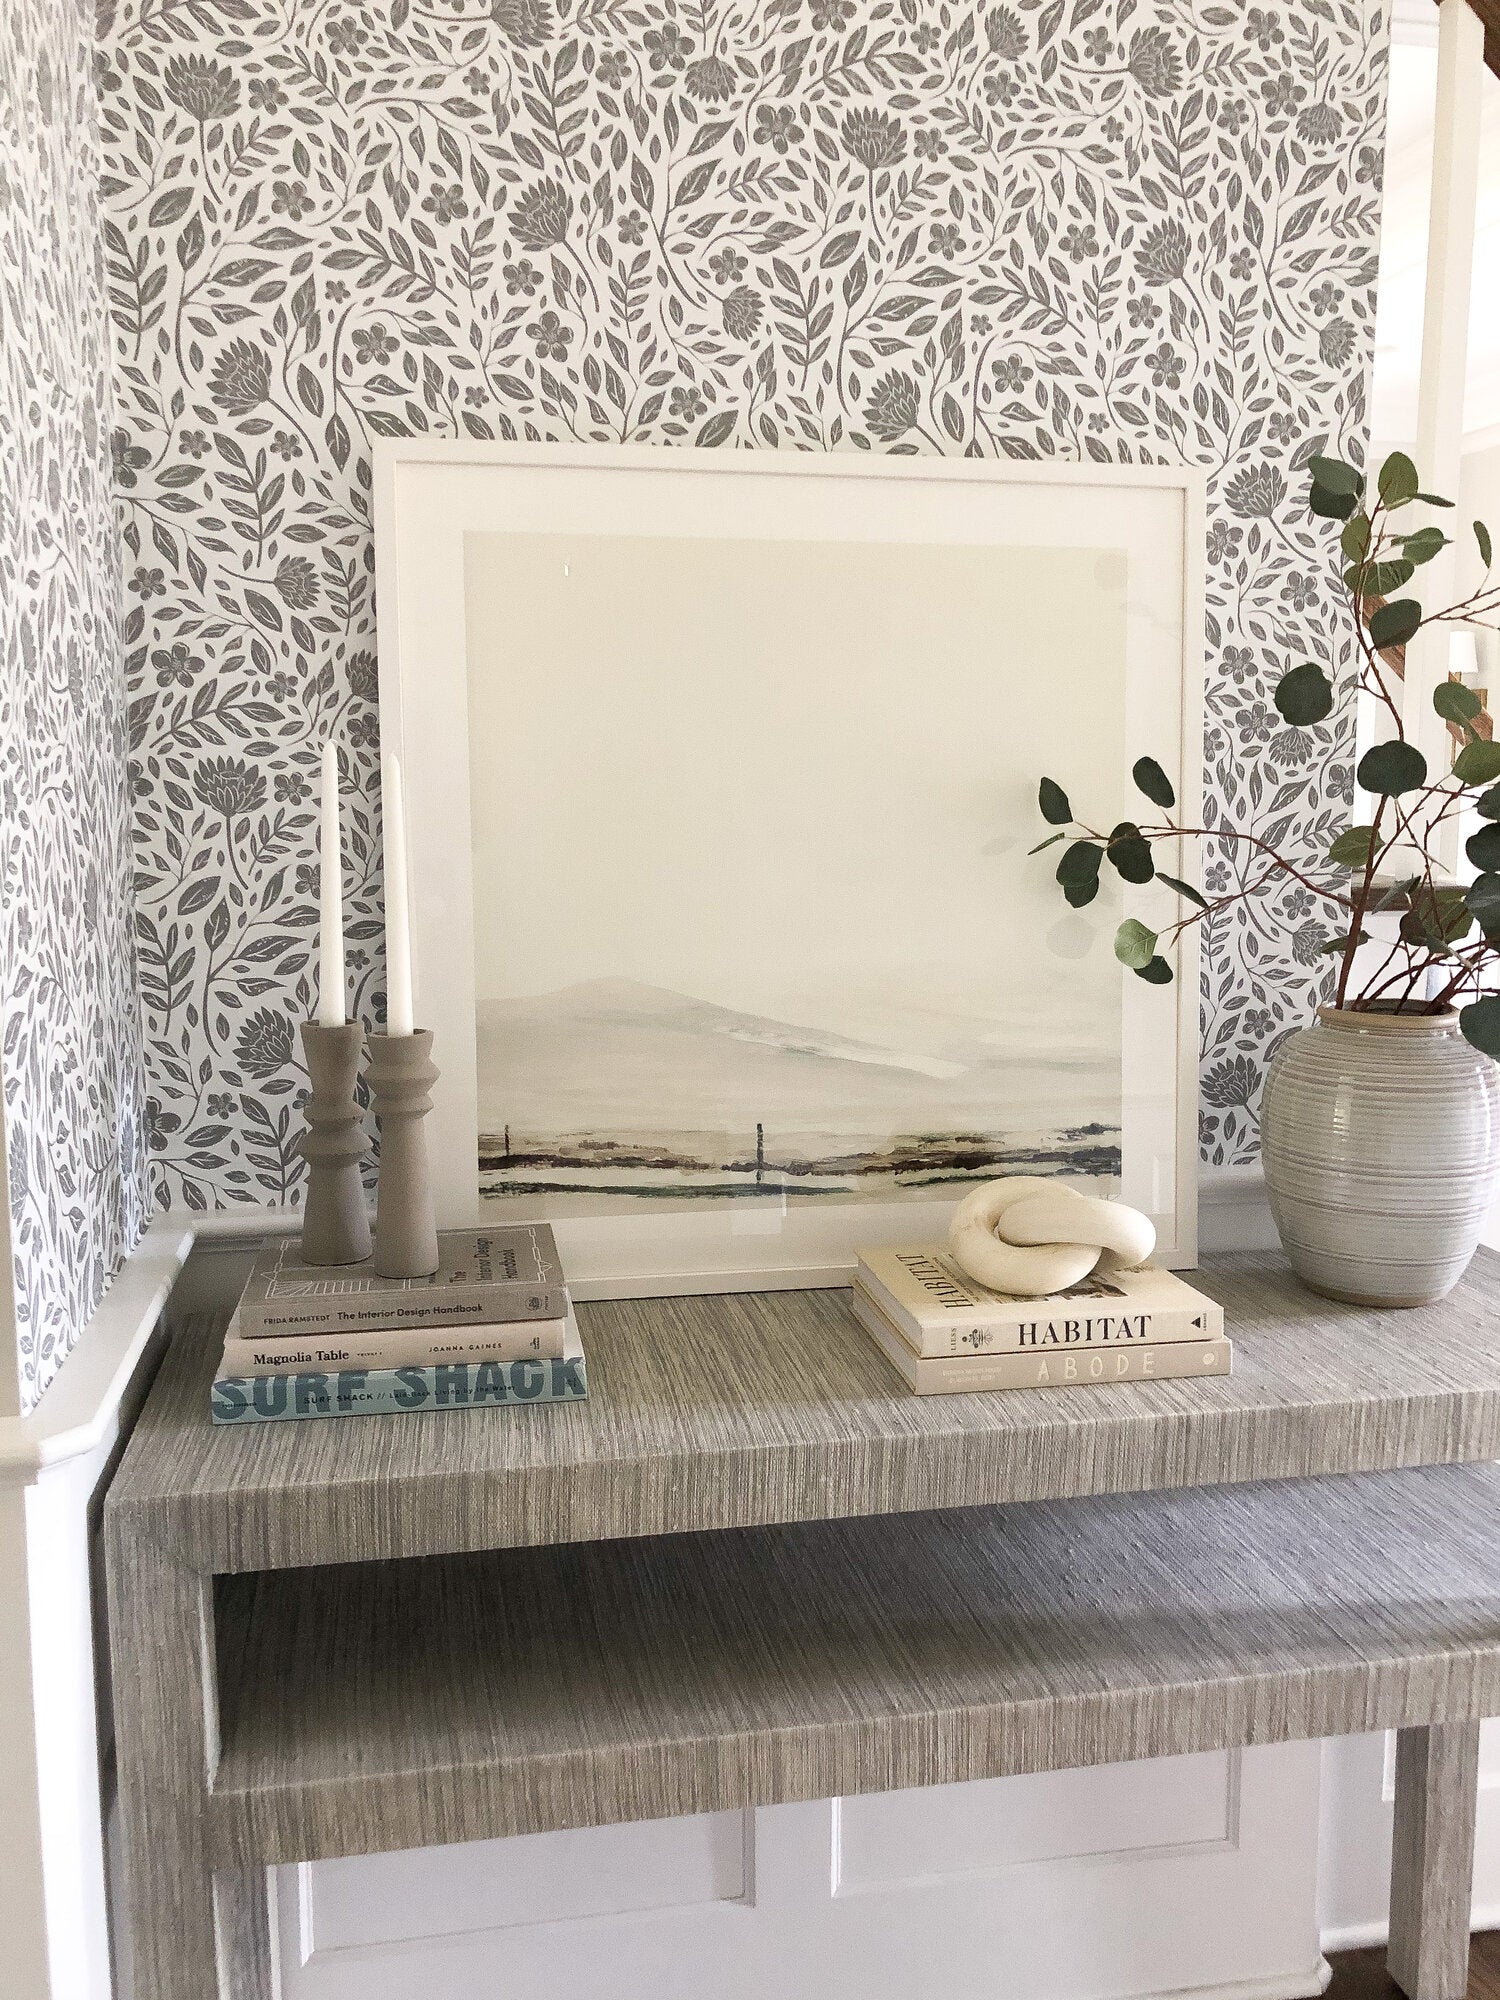 Table decor with books and decorated with grey and white peel and stick floral wallpaper